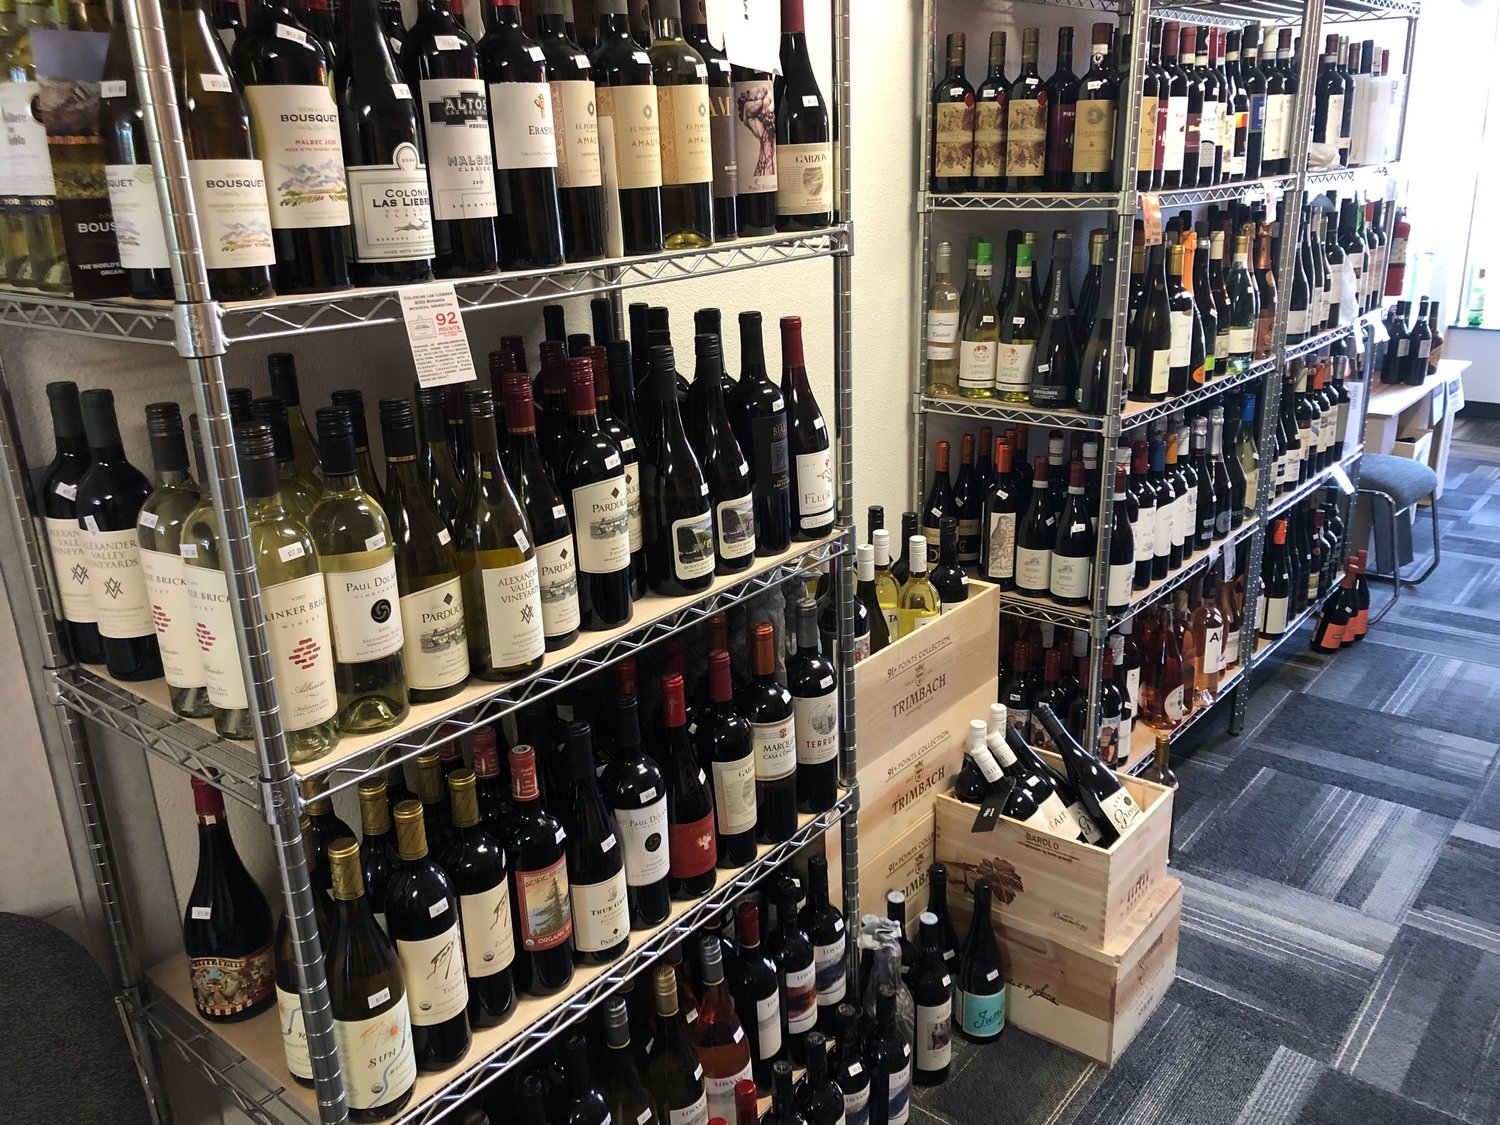 Oly Wines has extensive bottle collections from Washington, Oregon, France, Germany, Spain, Italy, Australia/New Zealand, California, South America, Israel, Lebanon and Uruguay.